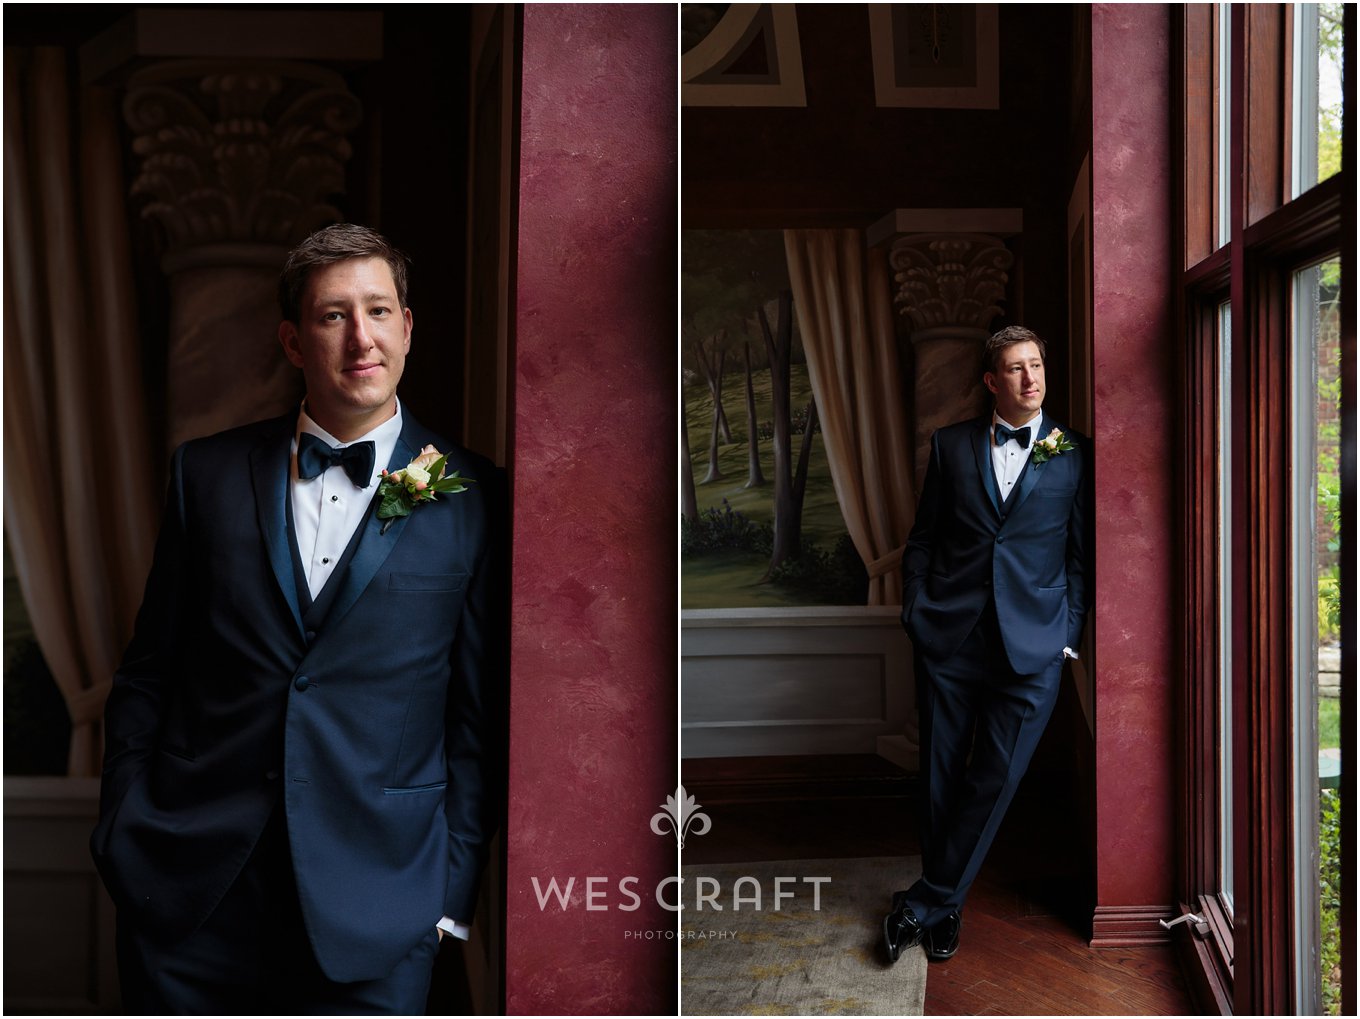 Michael looking dapper in the estate's dining room. Bay windows let in a striking bank of soft light.